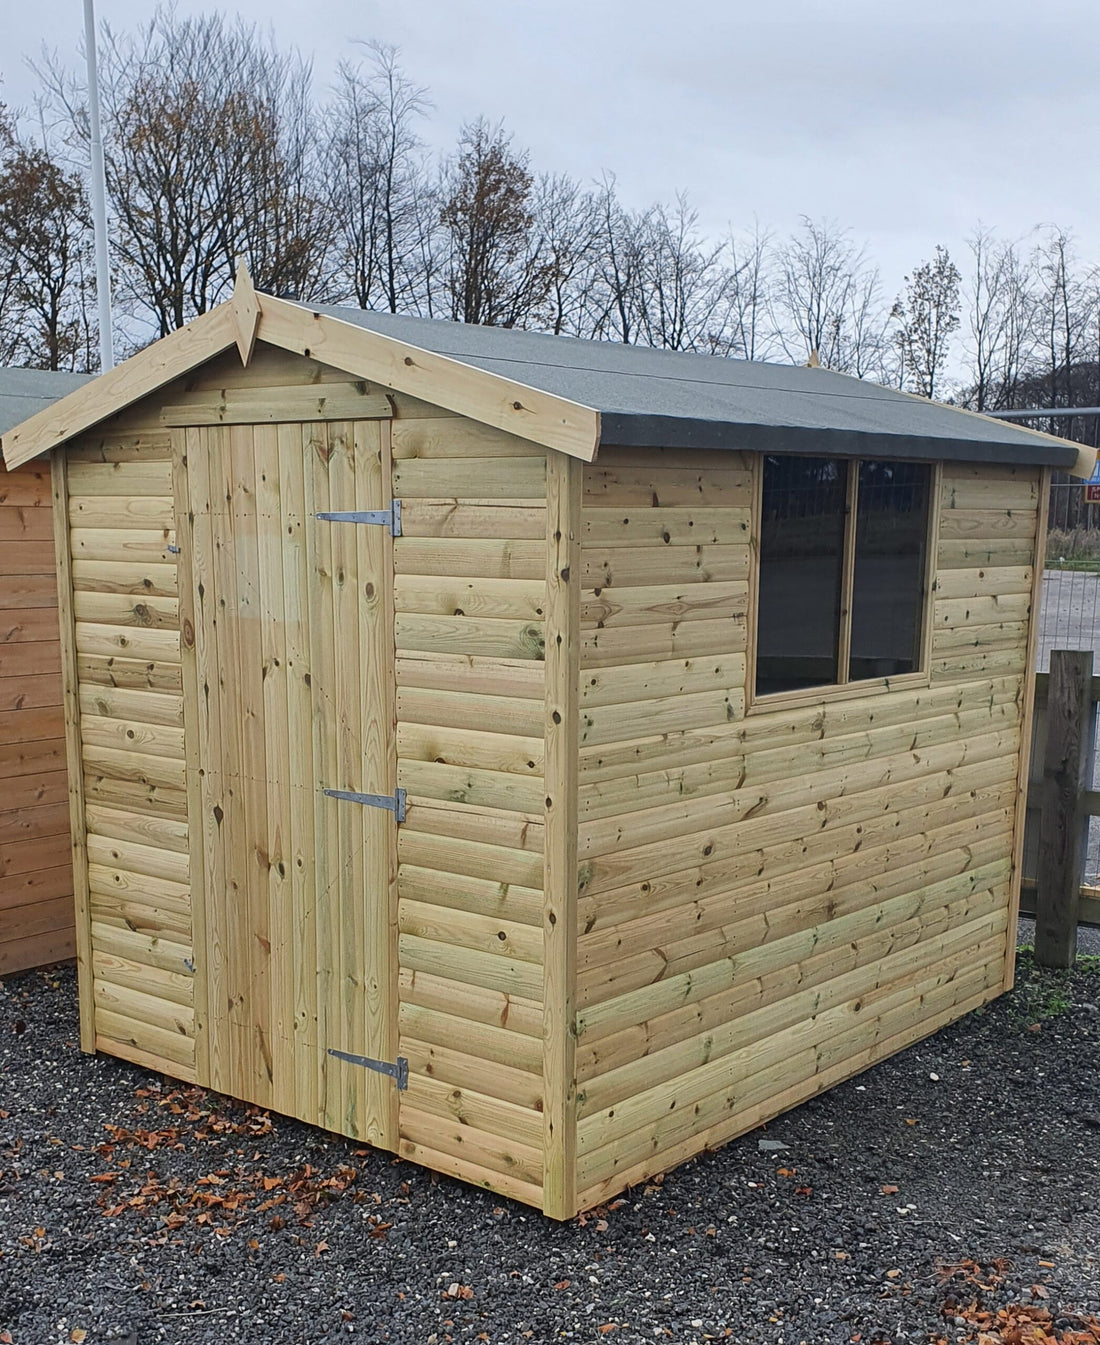 When All Shed And Done: The Benefits Of A Garden Shed